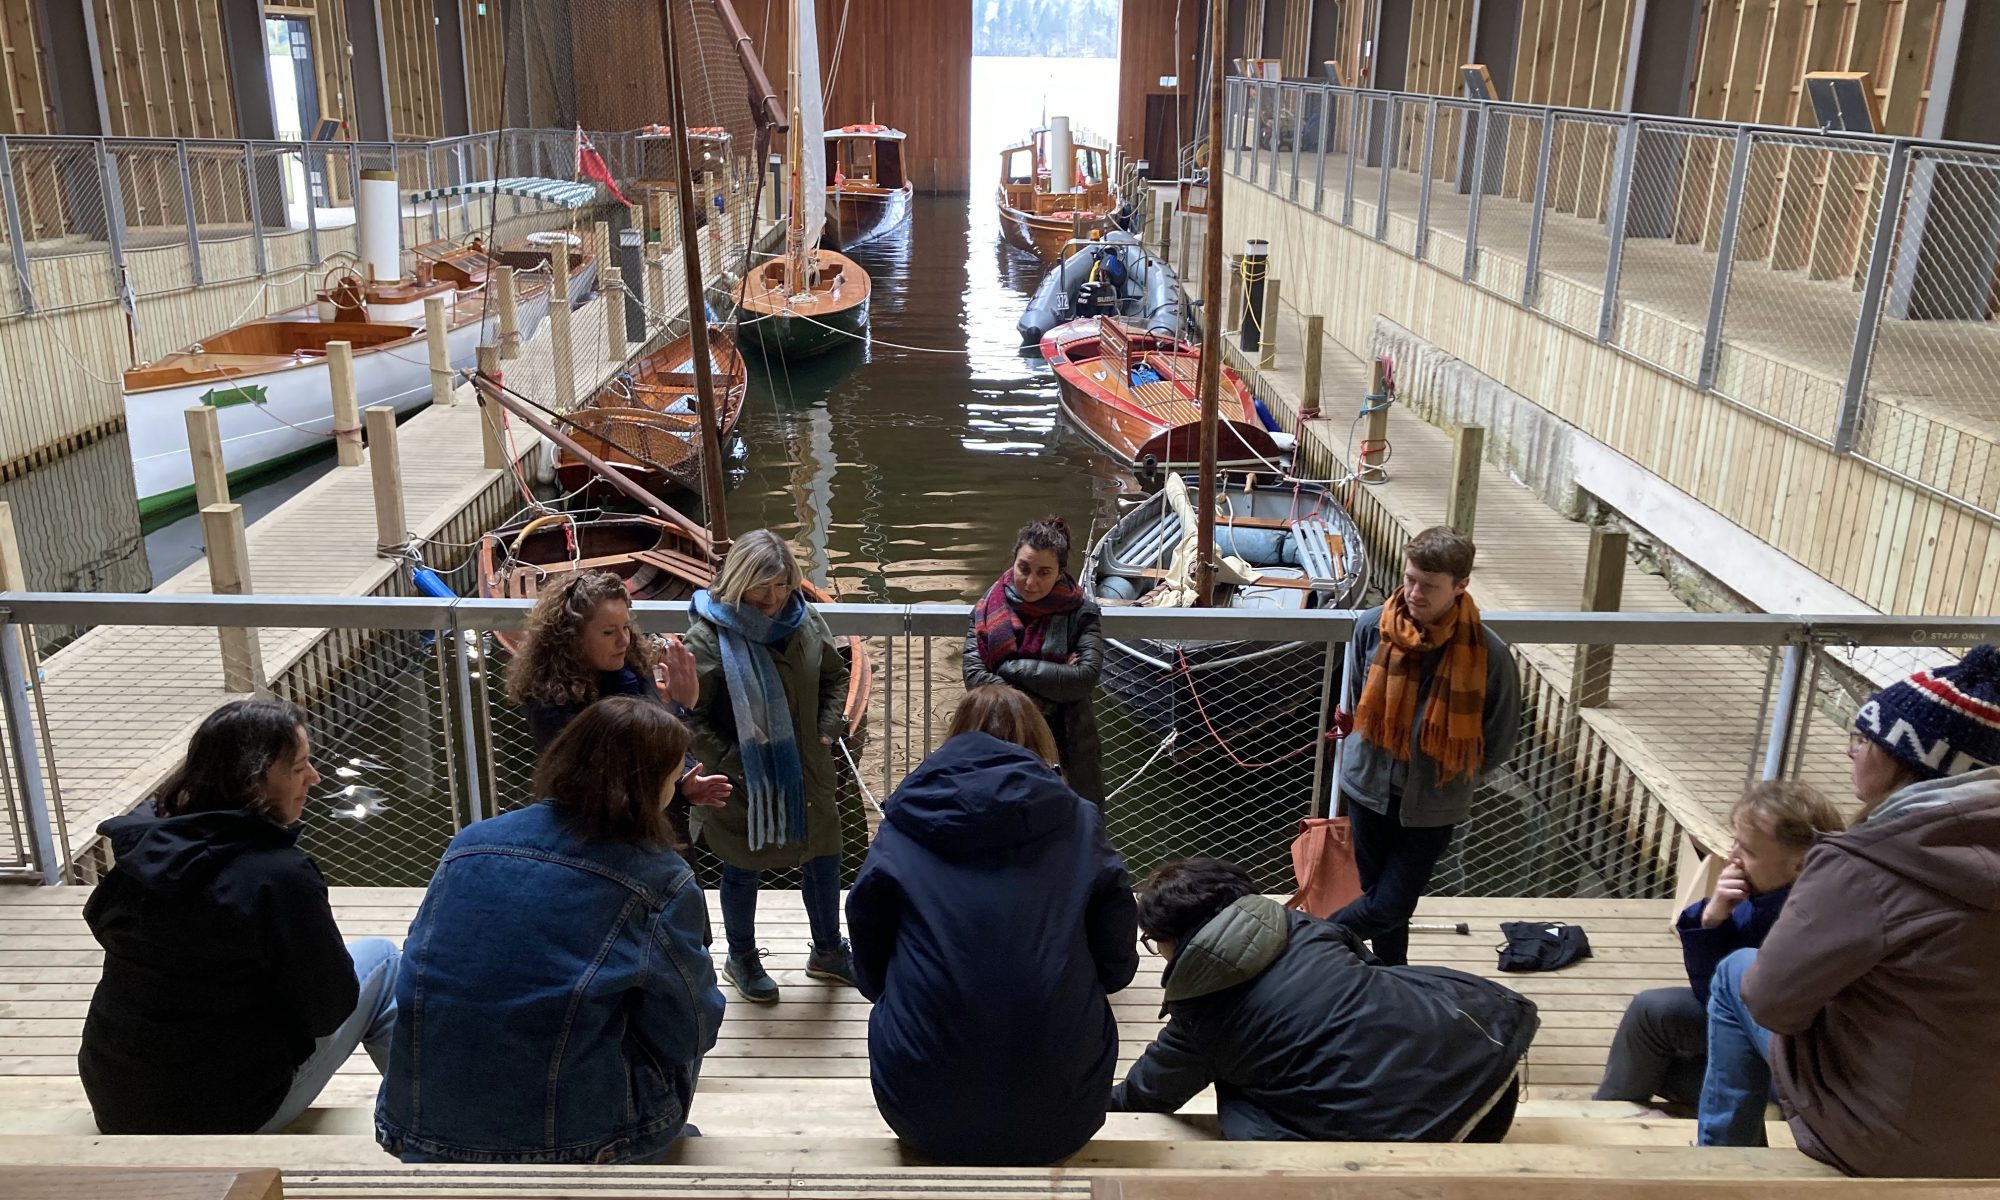 Members of Collective Futures gather in front of boats mored in a sheltered dock.